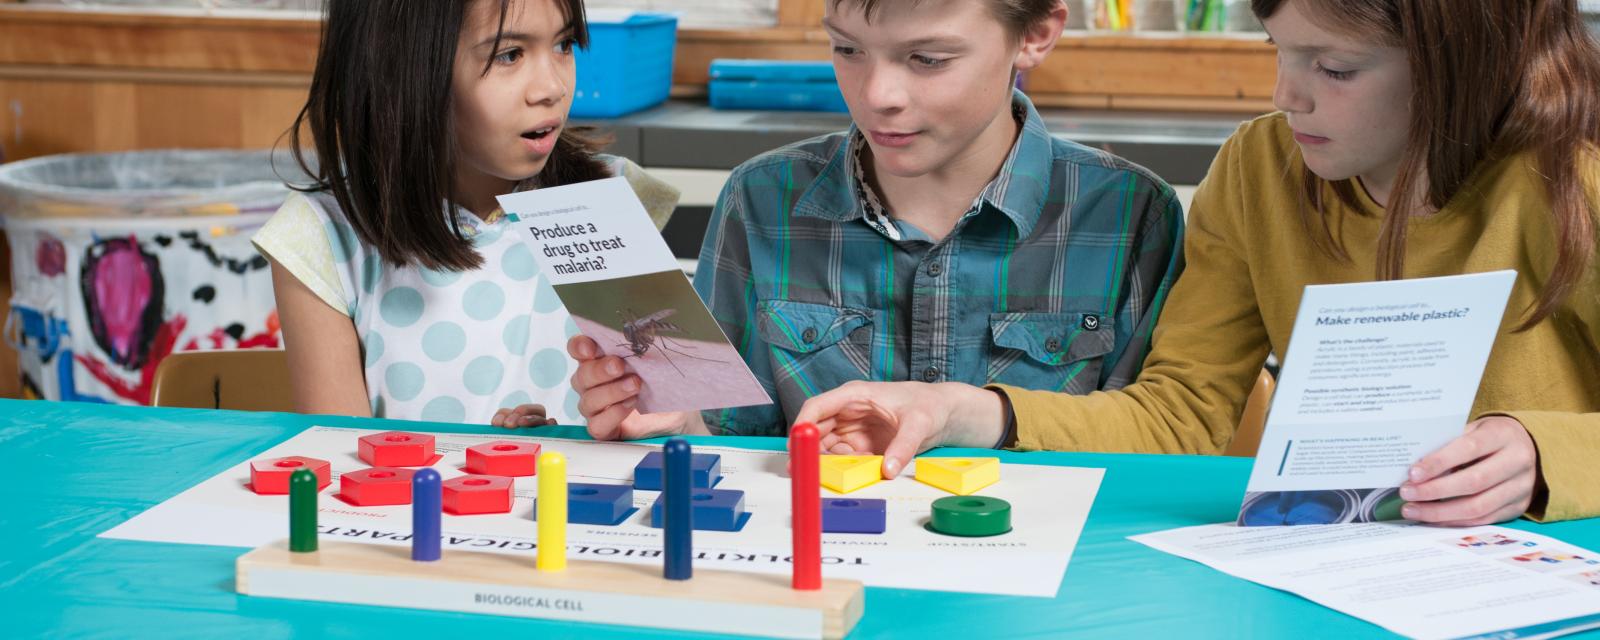 Children using Building with Biology kit of parts activity with colored blocks and cards